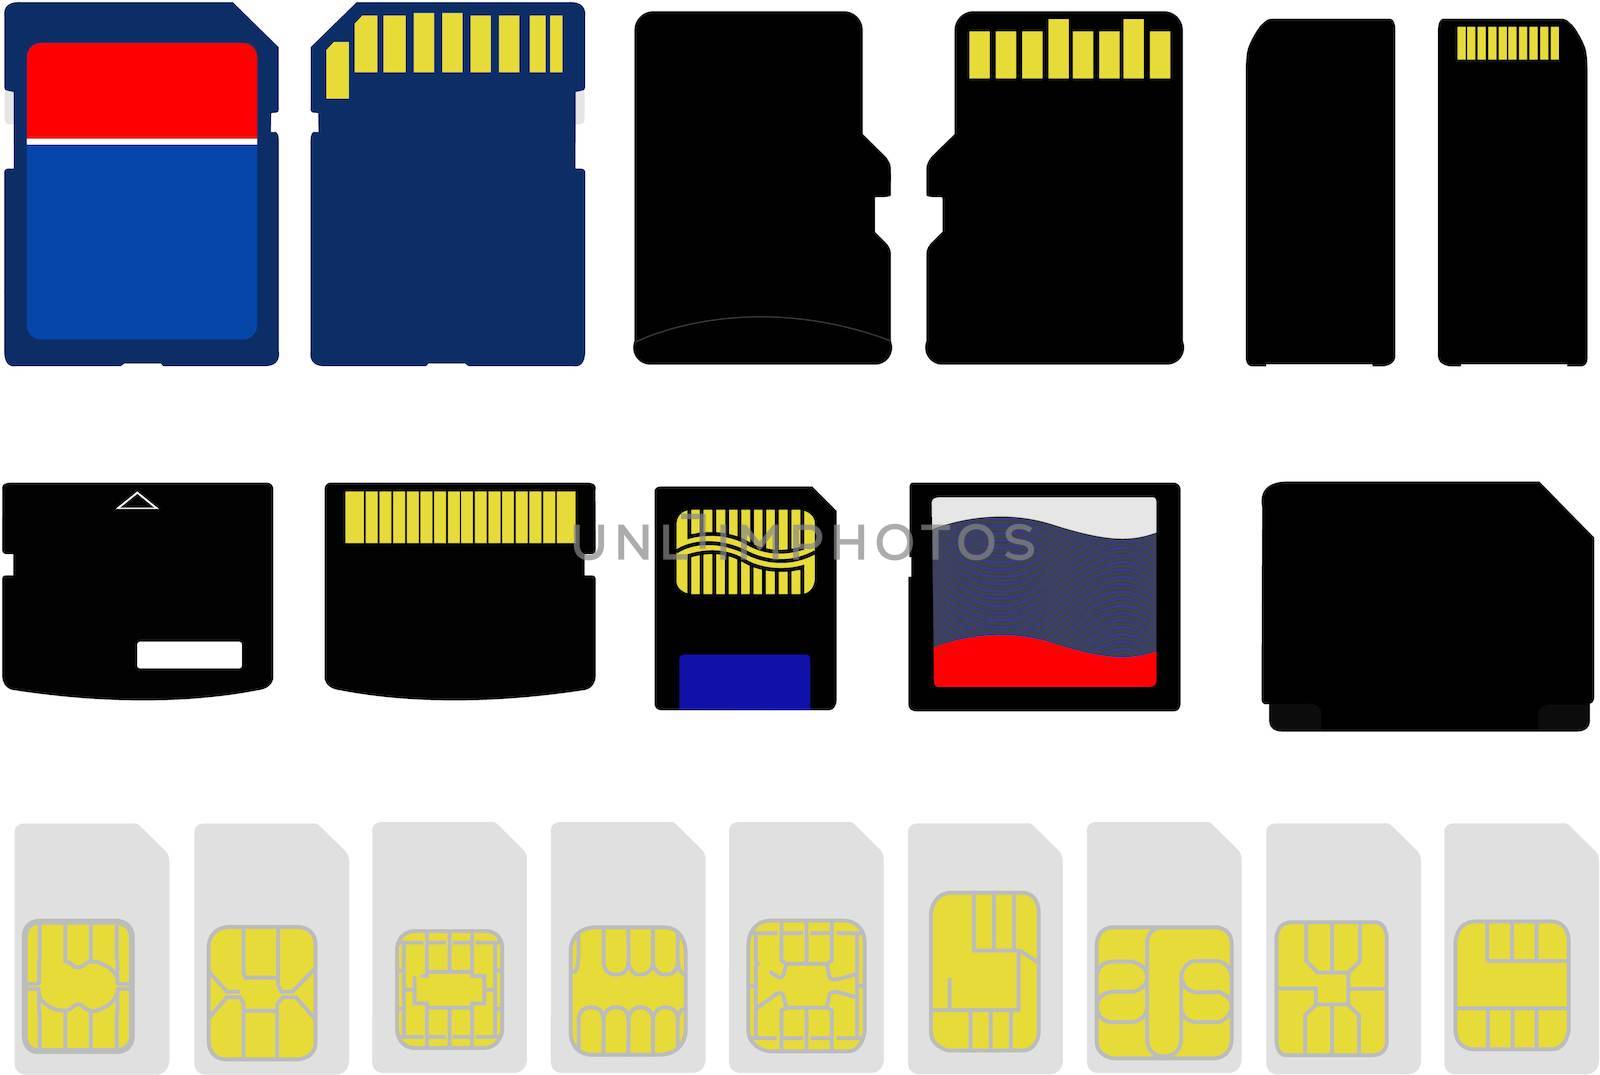 An Illustration of Selection of Memory and SIM Cards